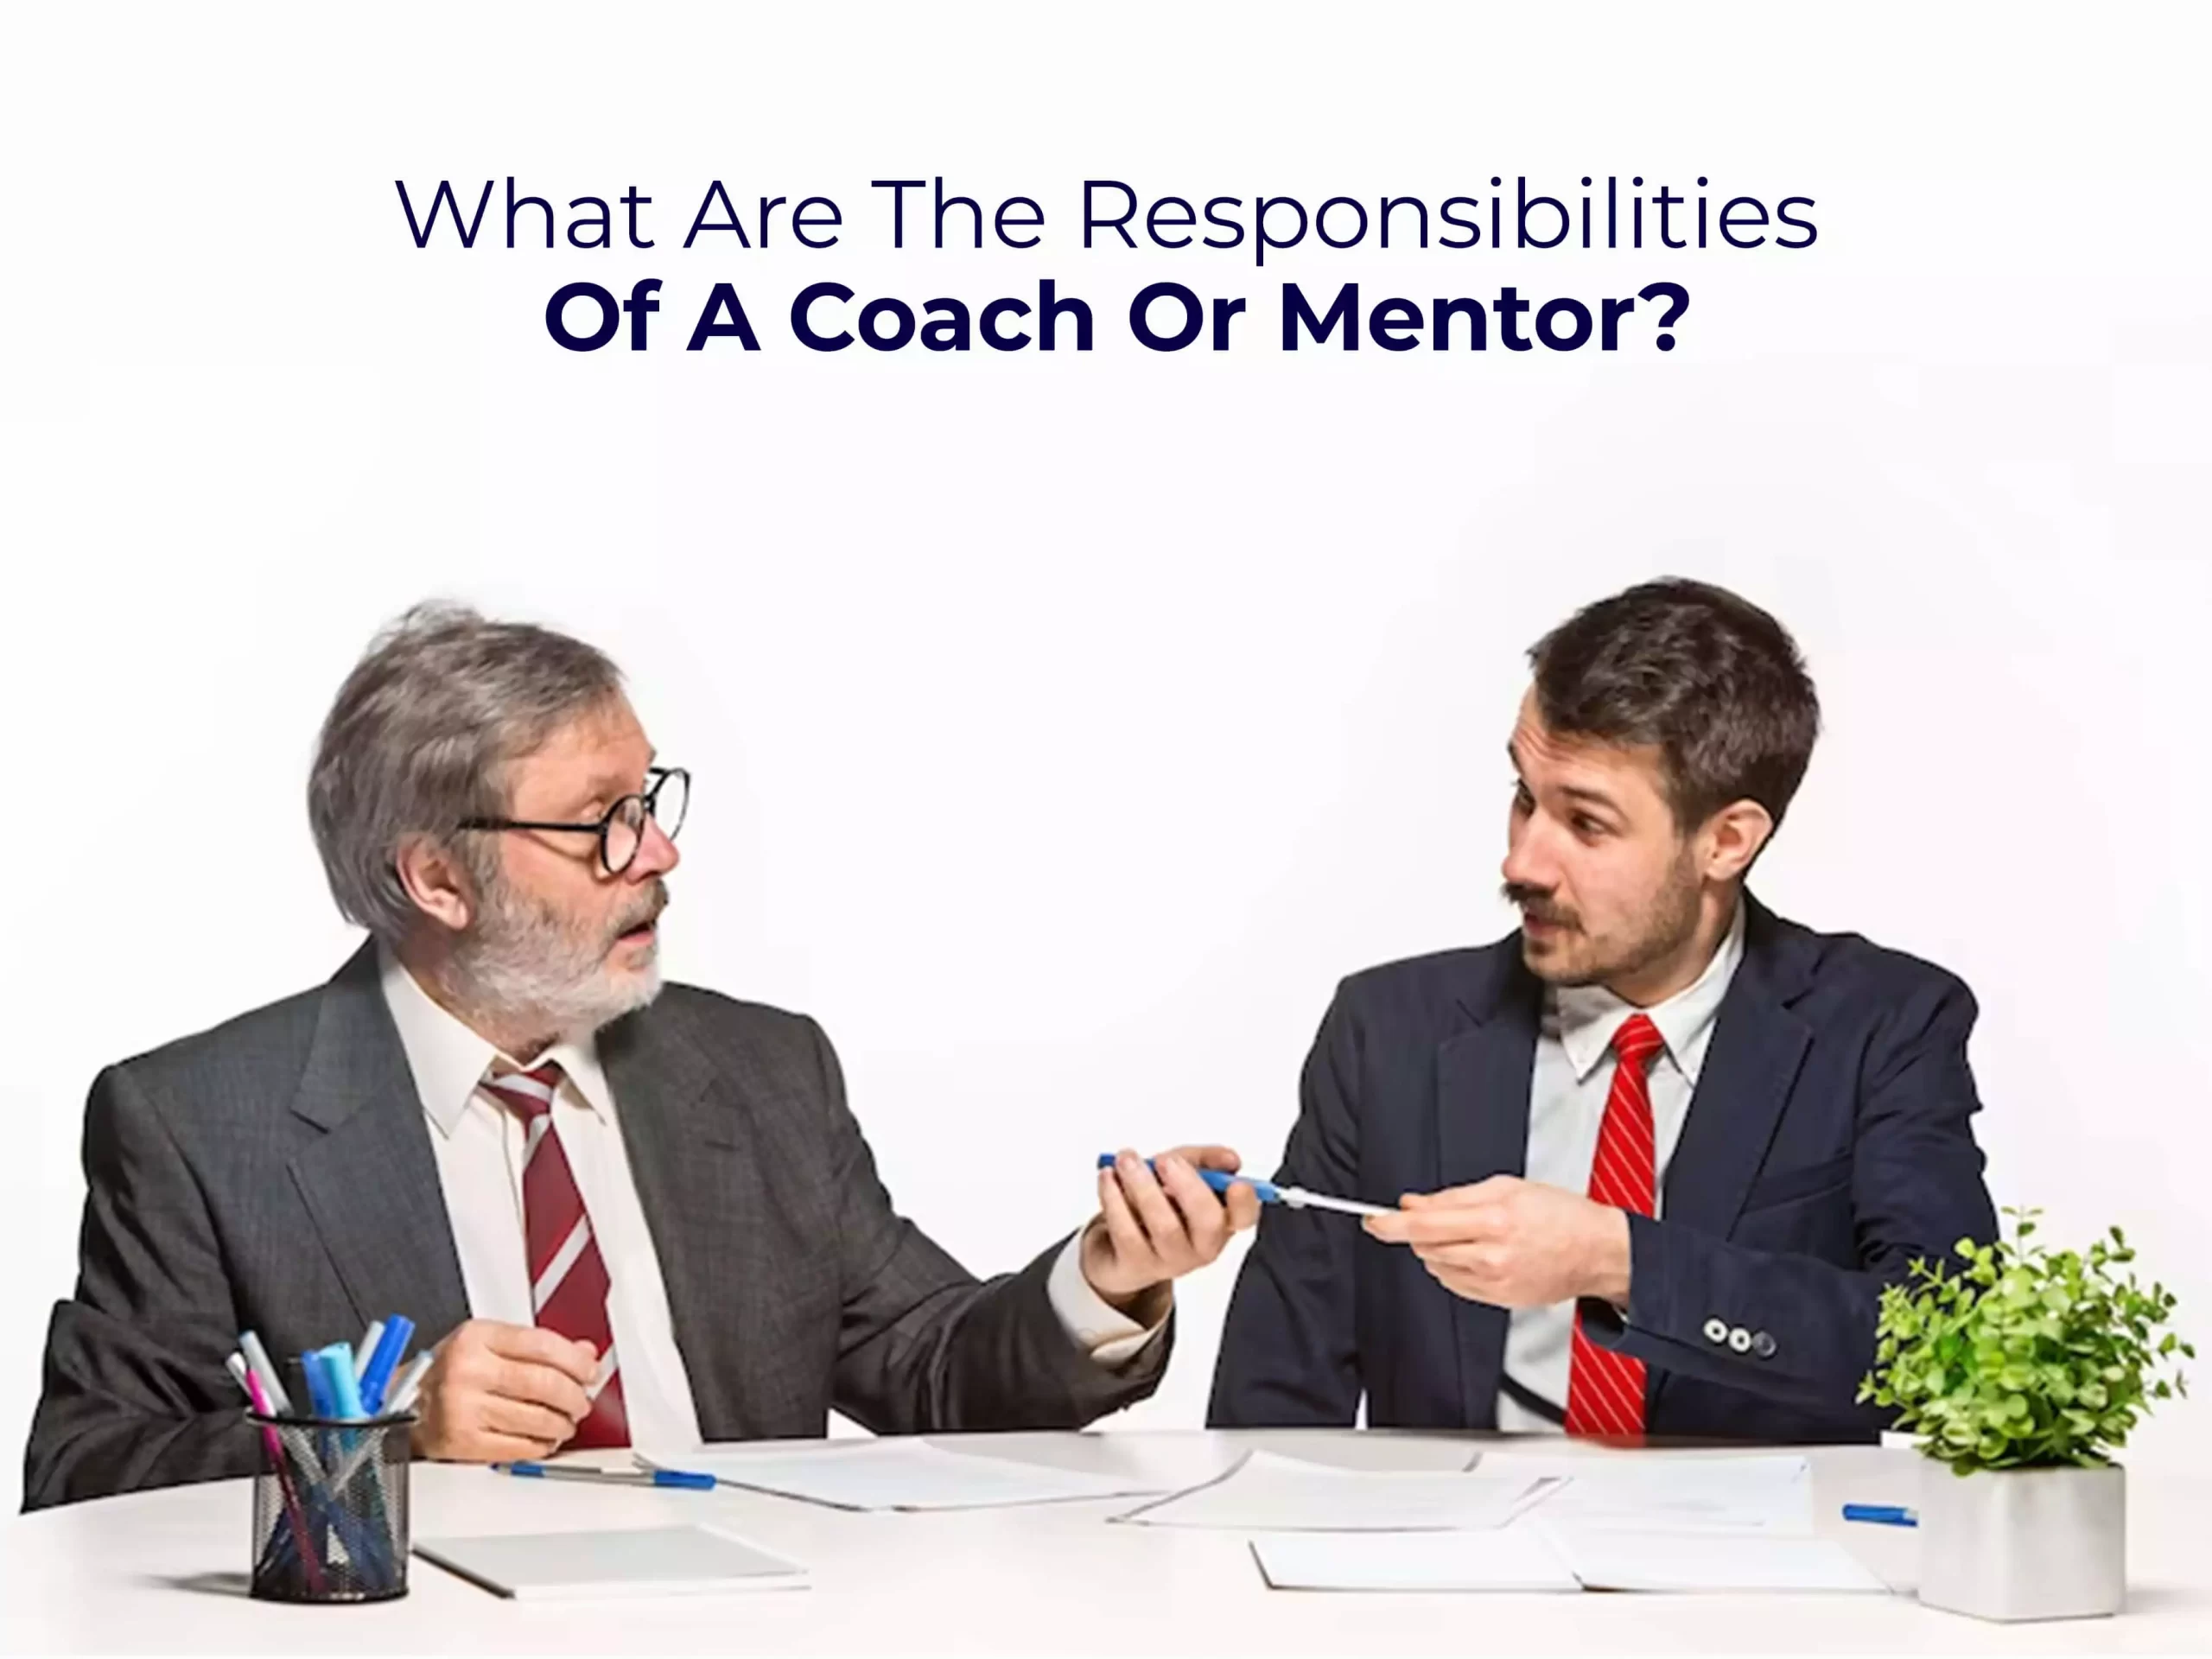 What Are The Responsibilities Of A Coach Or Mentor?